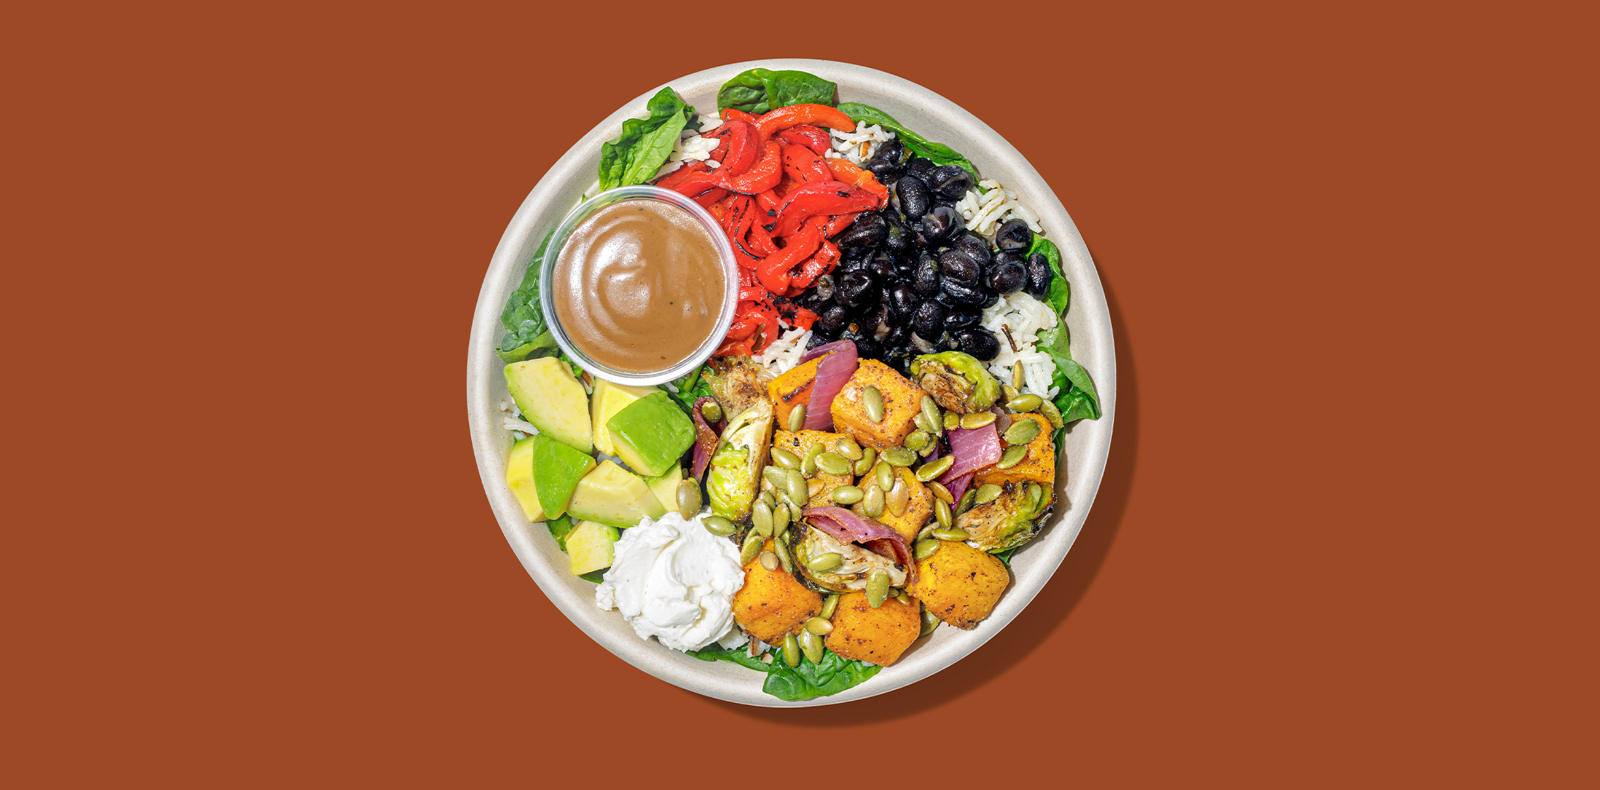 New Roadtrip Bowl called Roasted Veggies + Butternut Squash with Roasted butternut squash, red onion, red bell peppers + brussels sprouts, red lake nation wild rice, baby spinach, goat cheese, black beans, toasted pumpkin seeds, balsamic vinaigrette alt tag